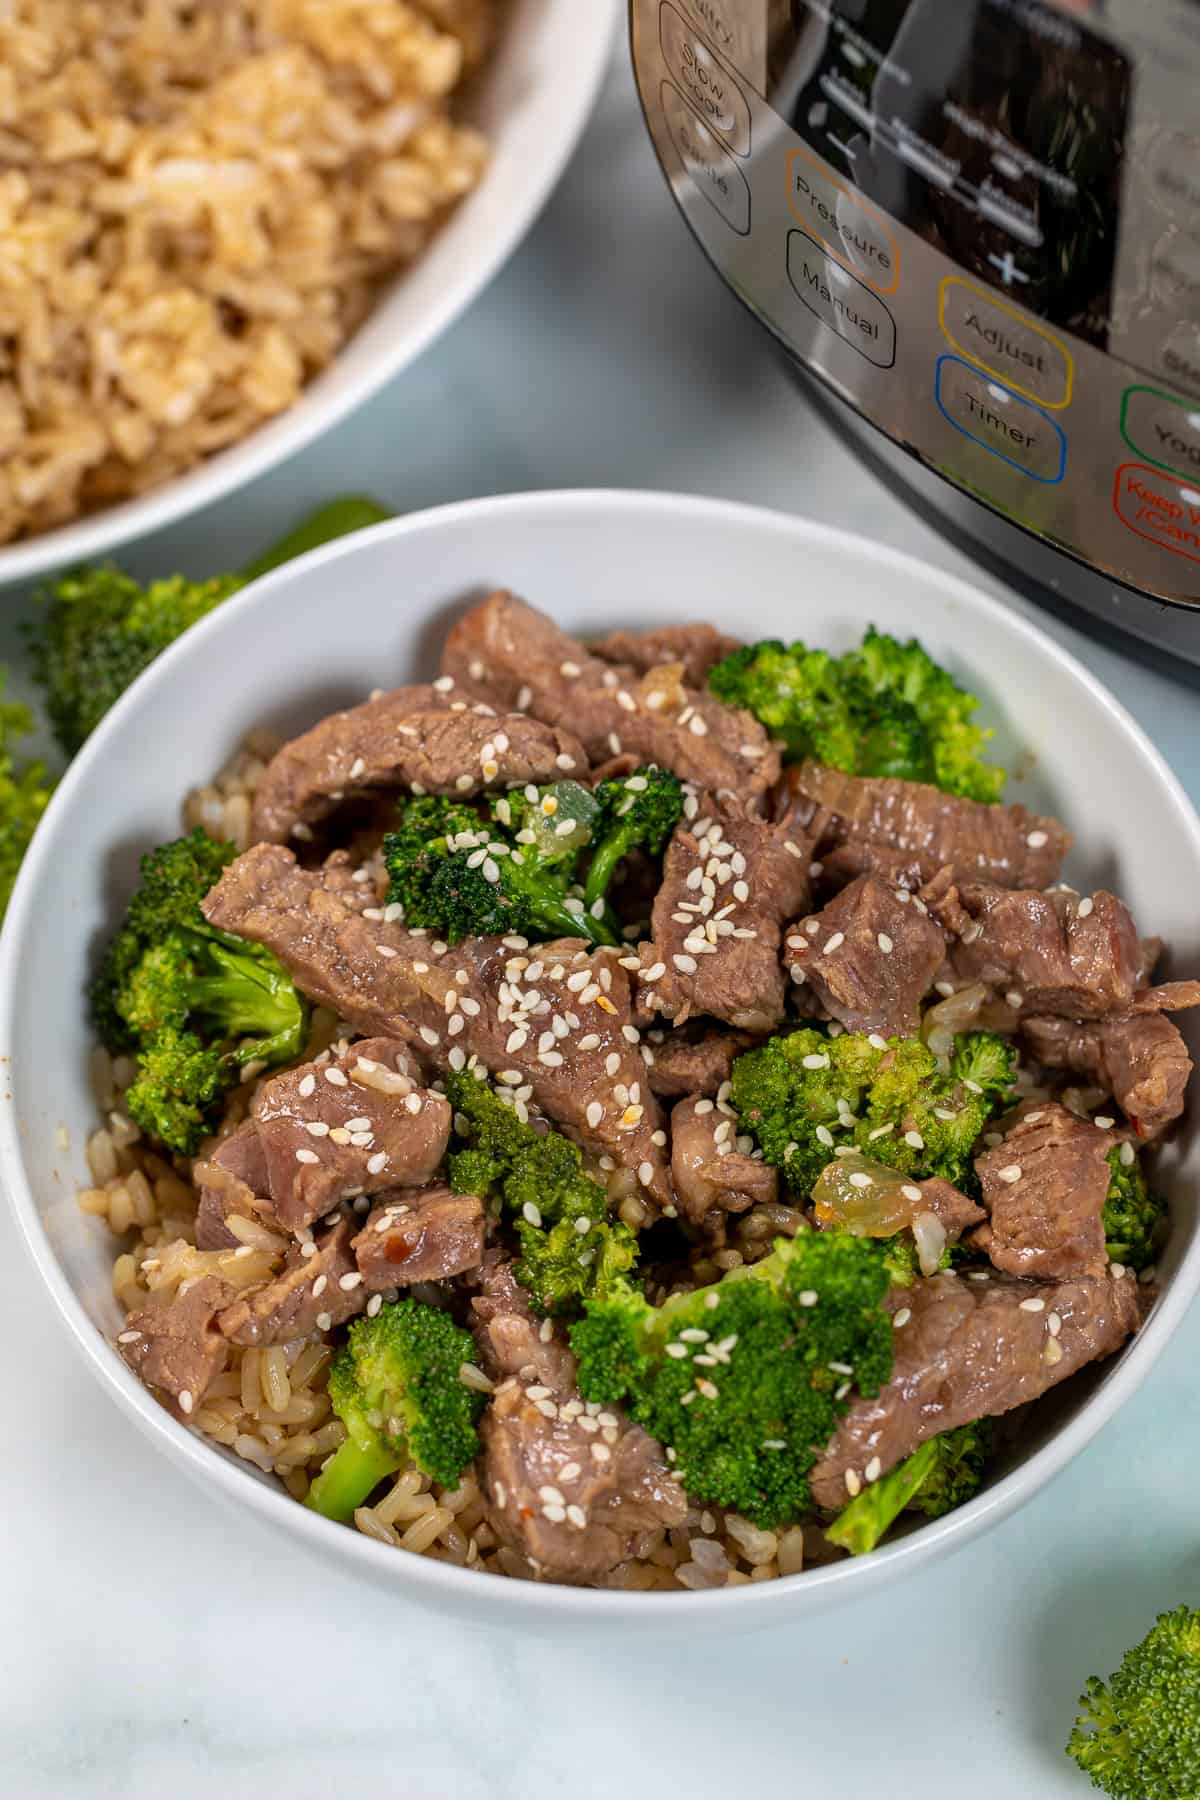 https://amindfullmom.com/wp-content/uploads/2020/10/Instant-Pot-Beef-and-Broccoli_.jpg